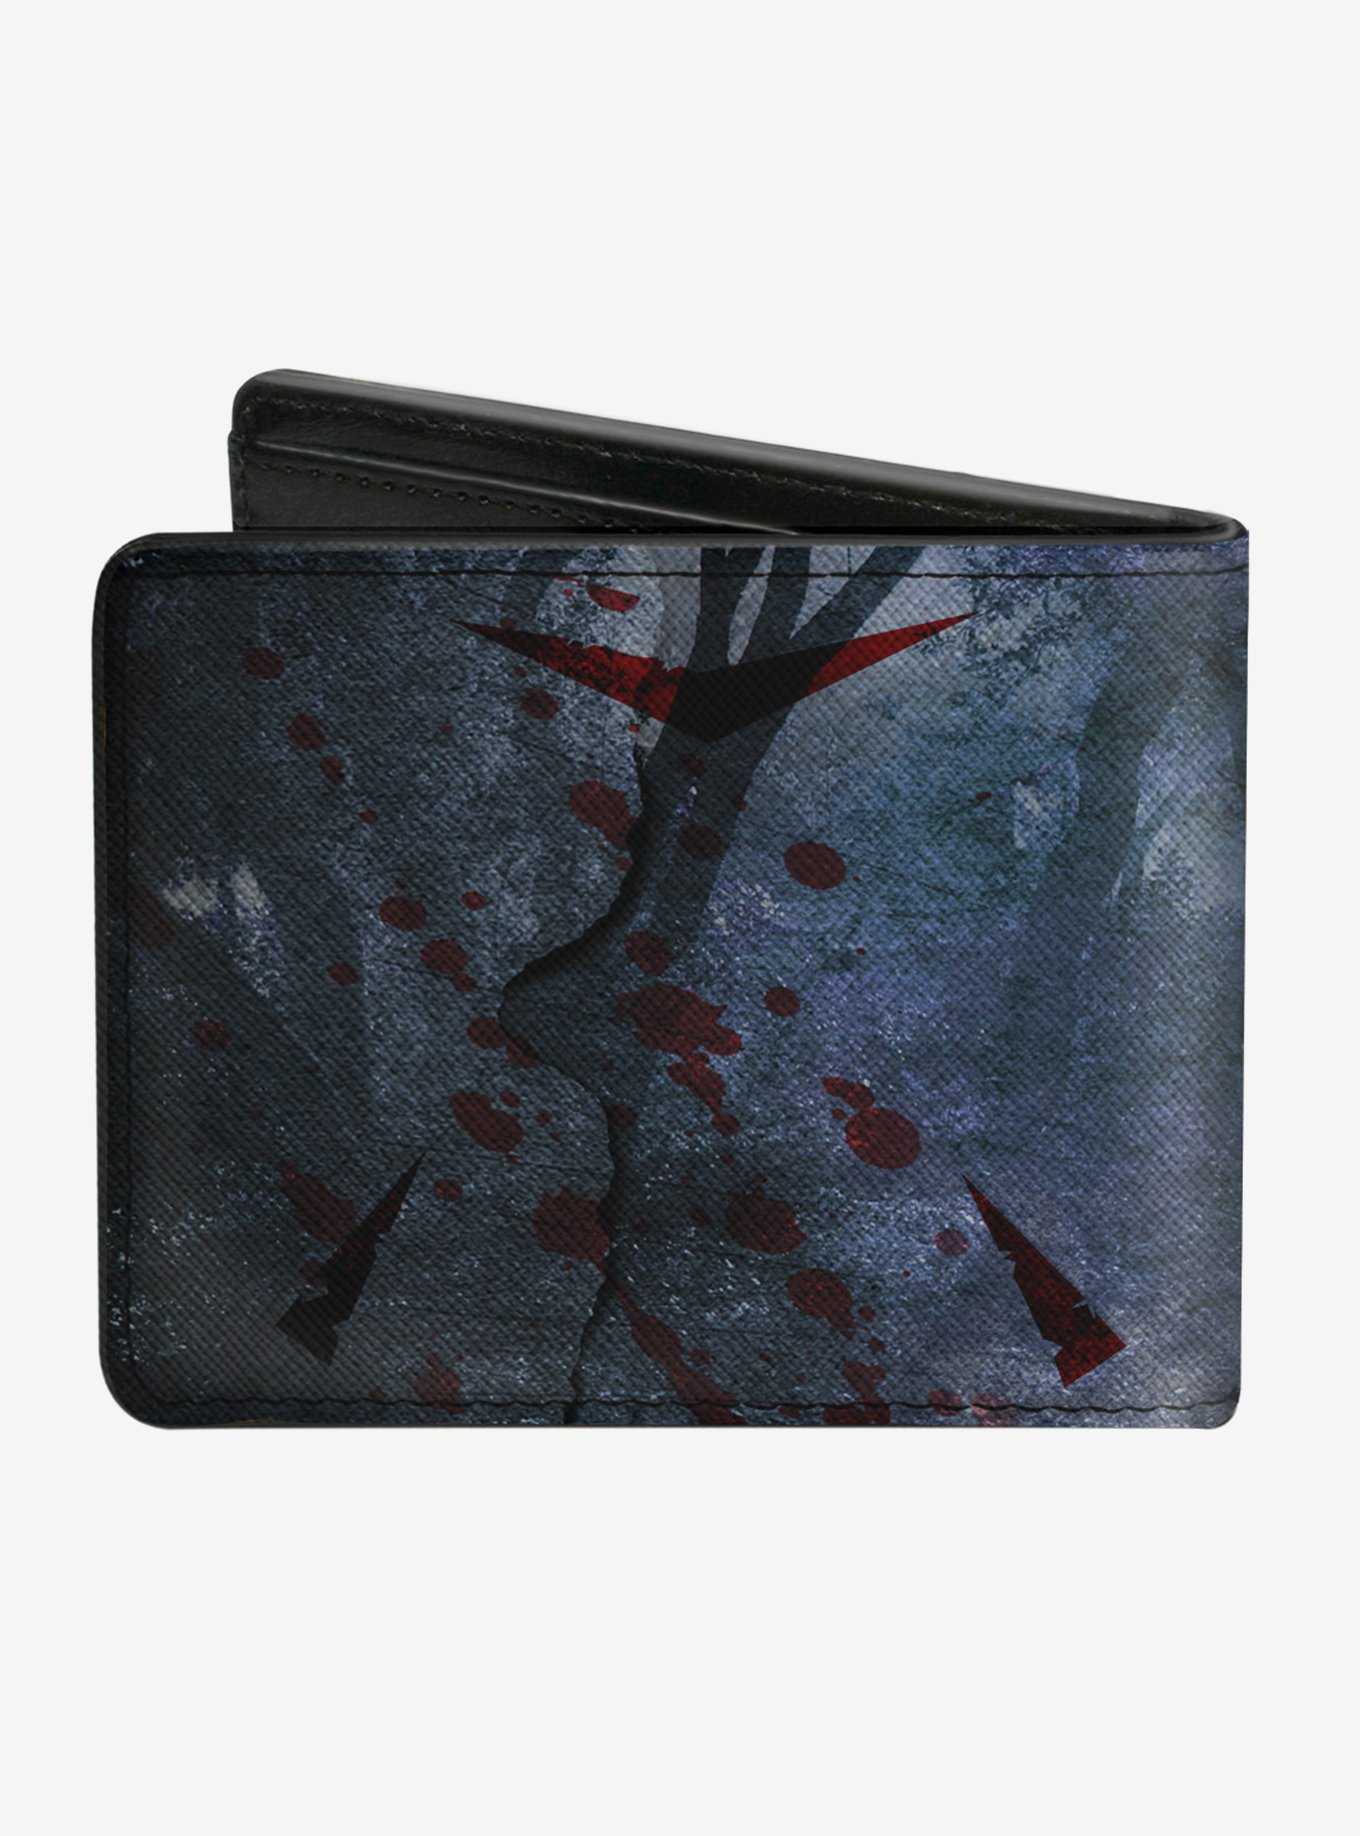 Friday the 13th Welcome to Camp Crystal Lake Sign Bifold Wallet, , hi-res